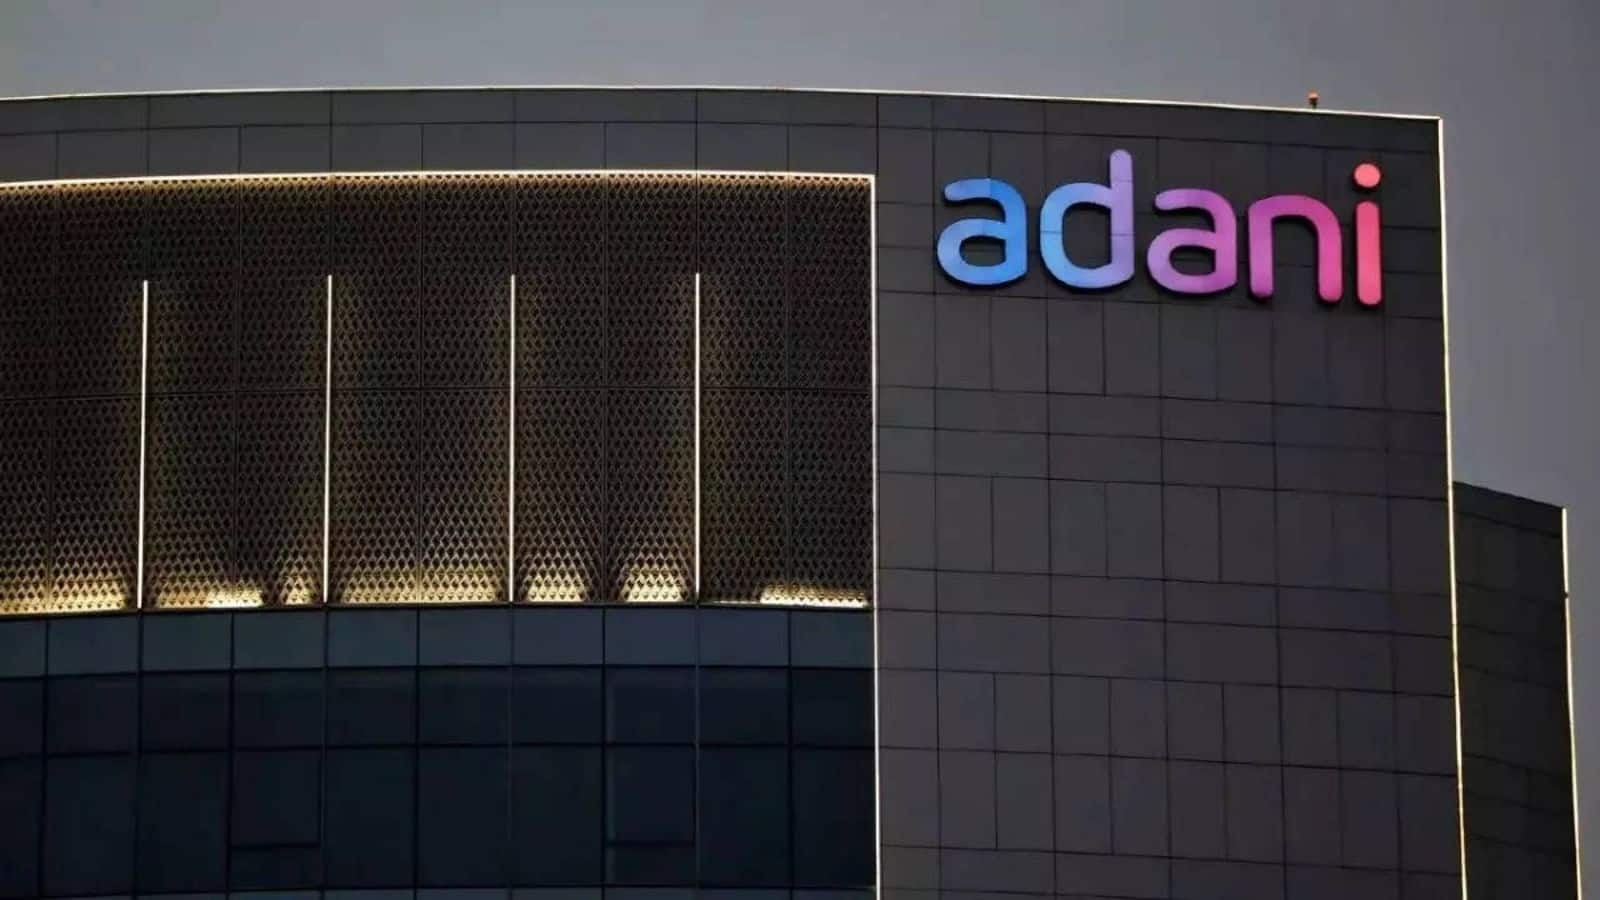 Adani Group refutes allegations of 'low-grade' coal supply, shares unaffected